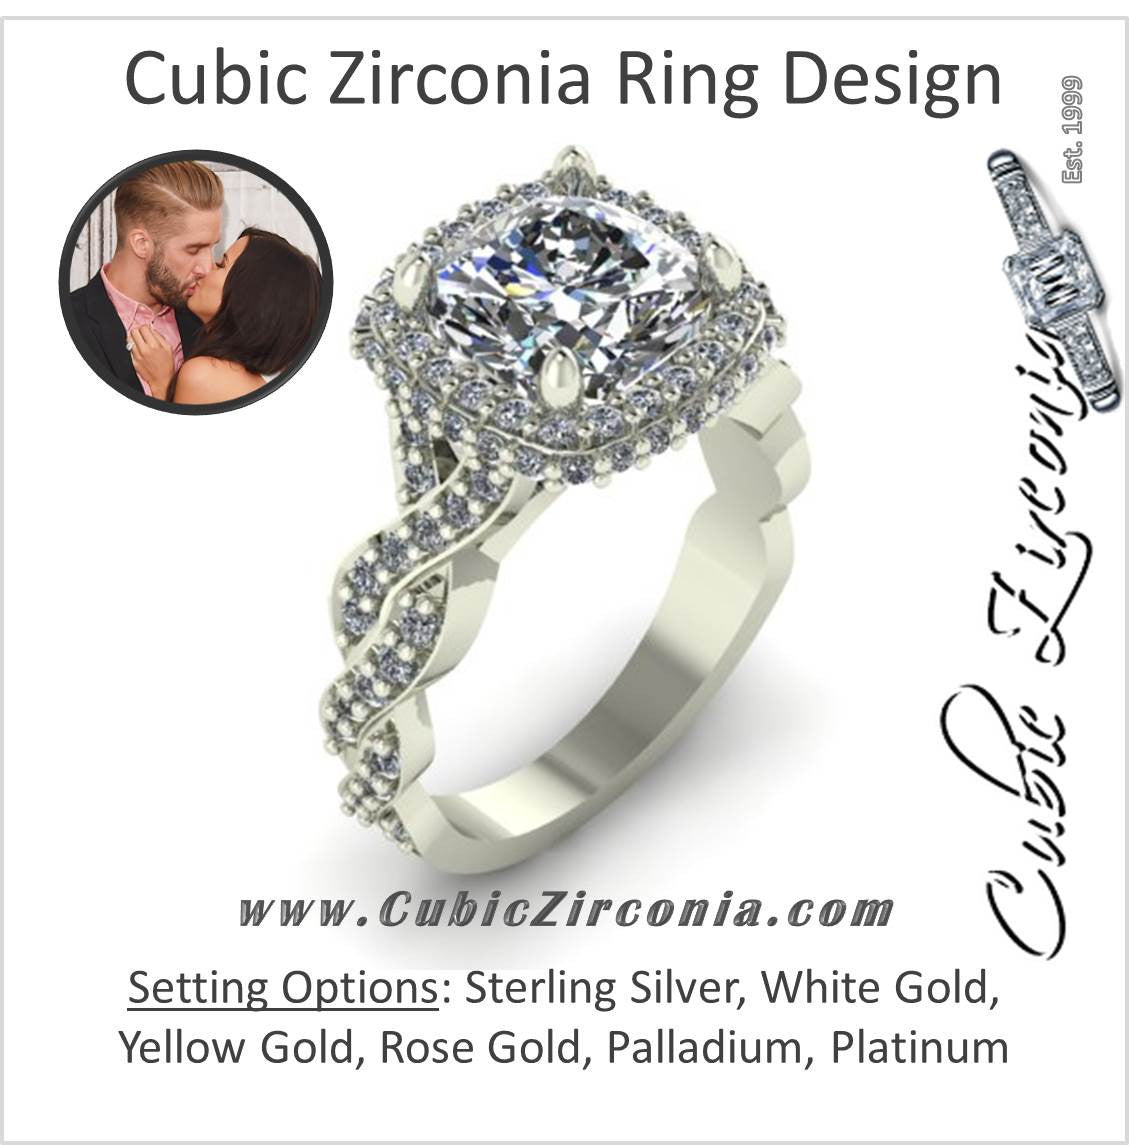 Cubic Zirconia Engagement Ring- 4.15 TCW Celebrity Replica Kaitlyn Bristowe's Ring